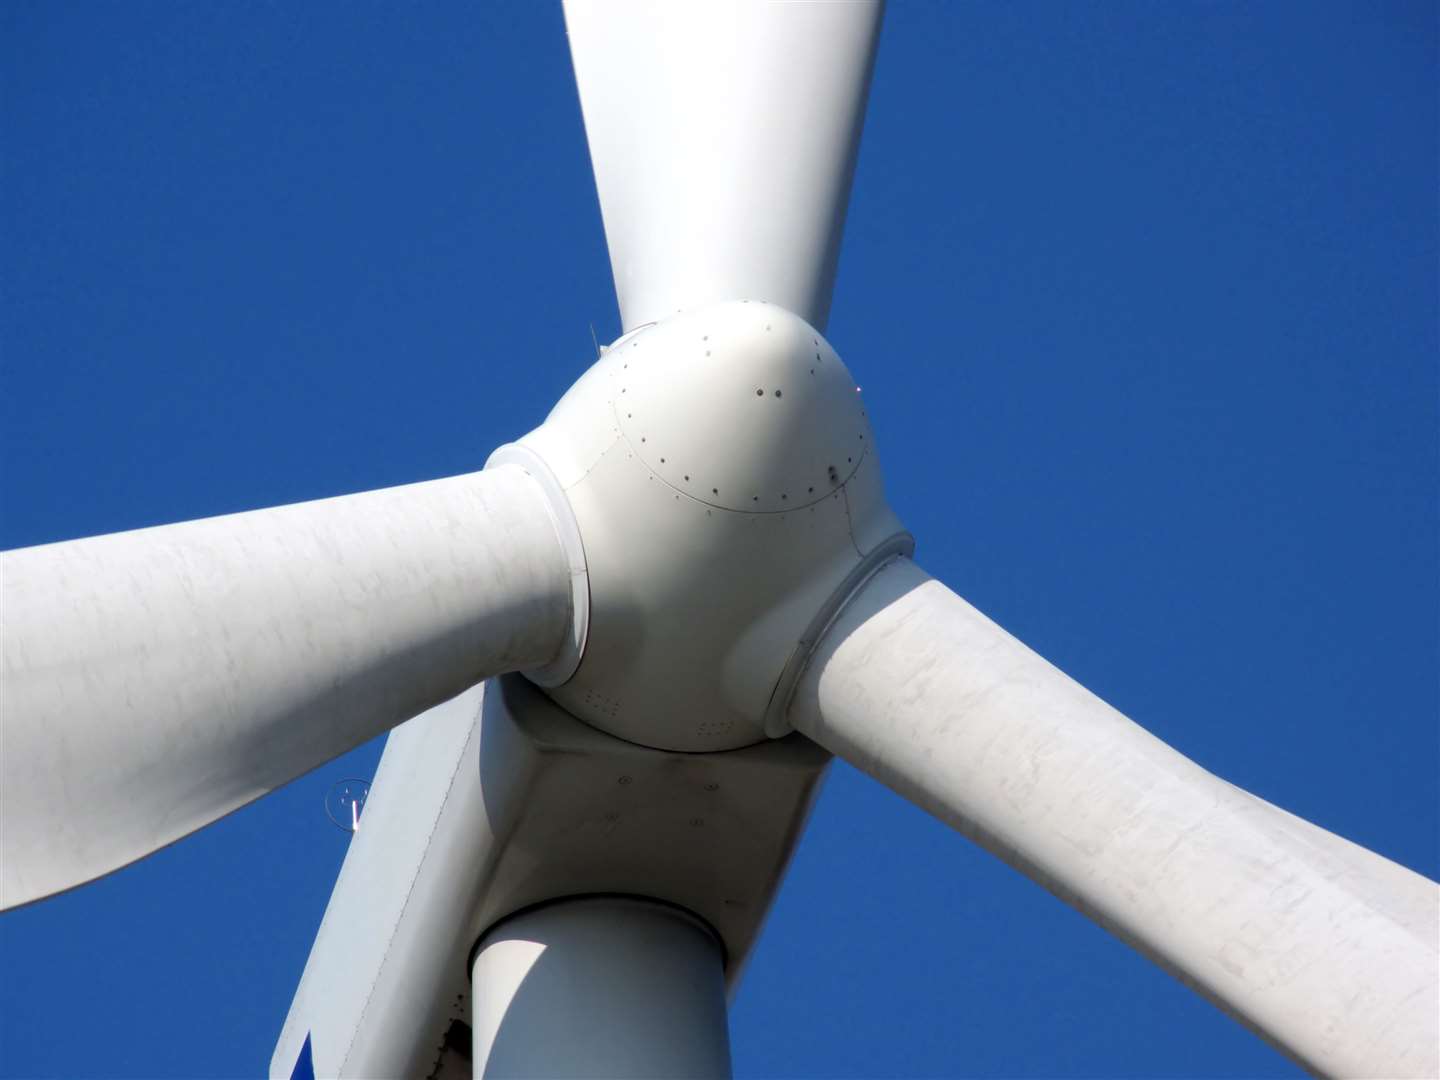 Wind turbines are described as unreliable, with horrific infrastructure.